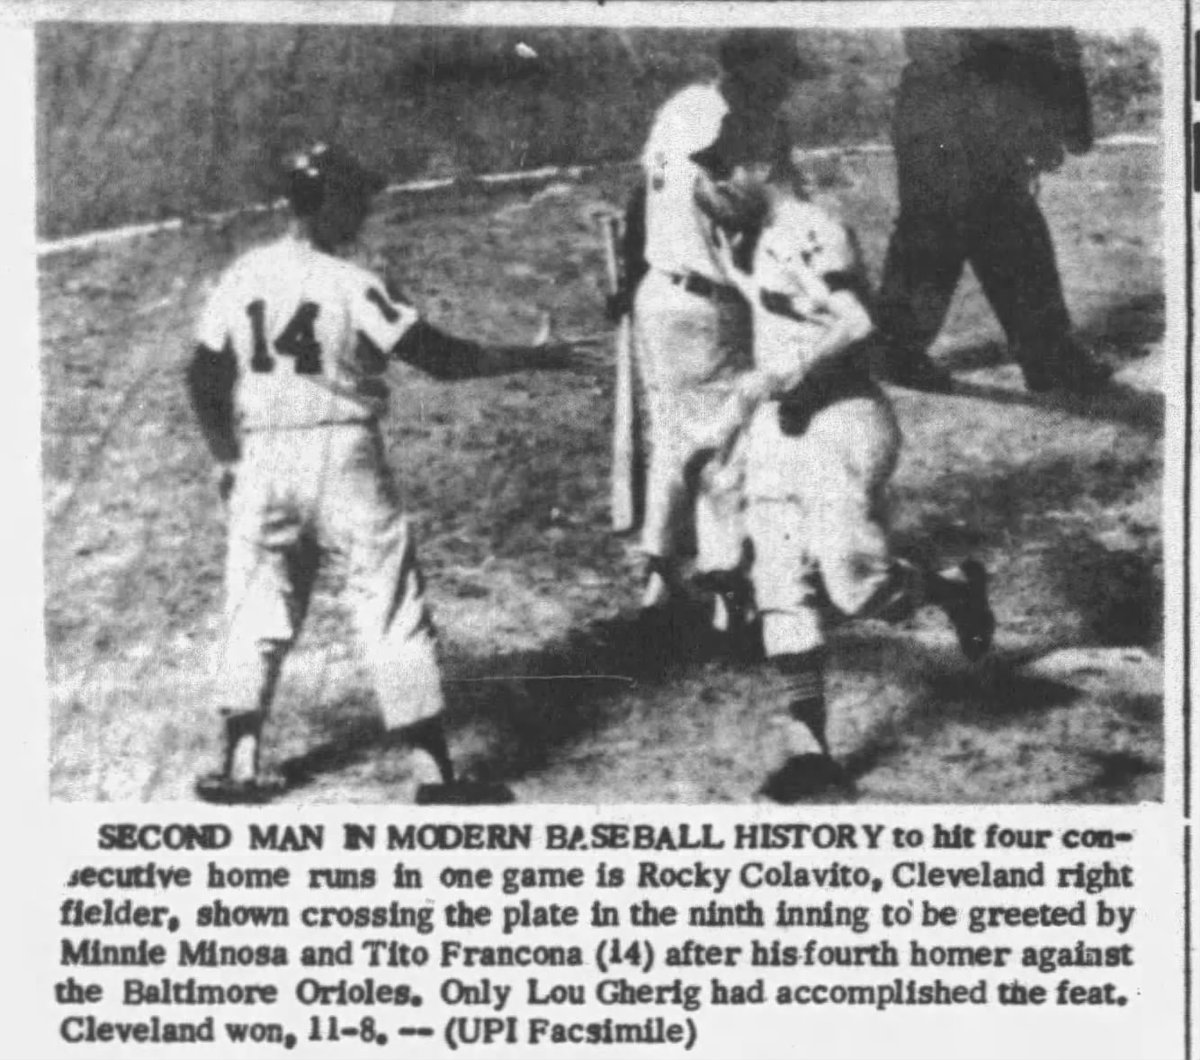 June 10, 1959: Don't Knock The Rock⚾️
In a feat more rare than the hallowed Perfect Game, Rocky Colavito hits 4 HRs in 1 game #ForTheLand beats Baltimore 
2nd player in modern MLB history to do it (Lou Gehrig is other)
Tito's dad (#14) greets him at plate
#TheRock
#HR #HR #HR #HR